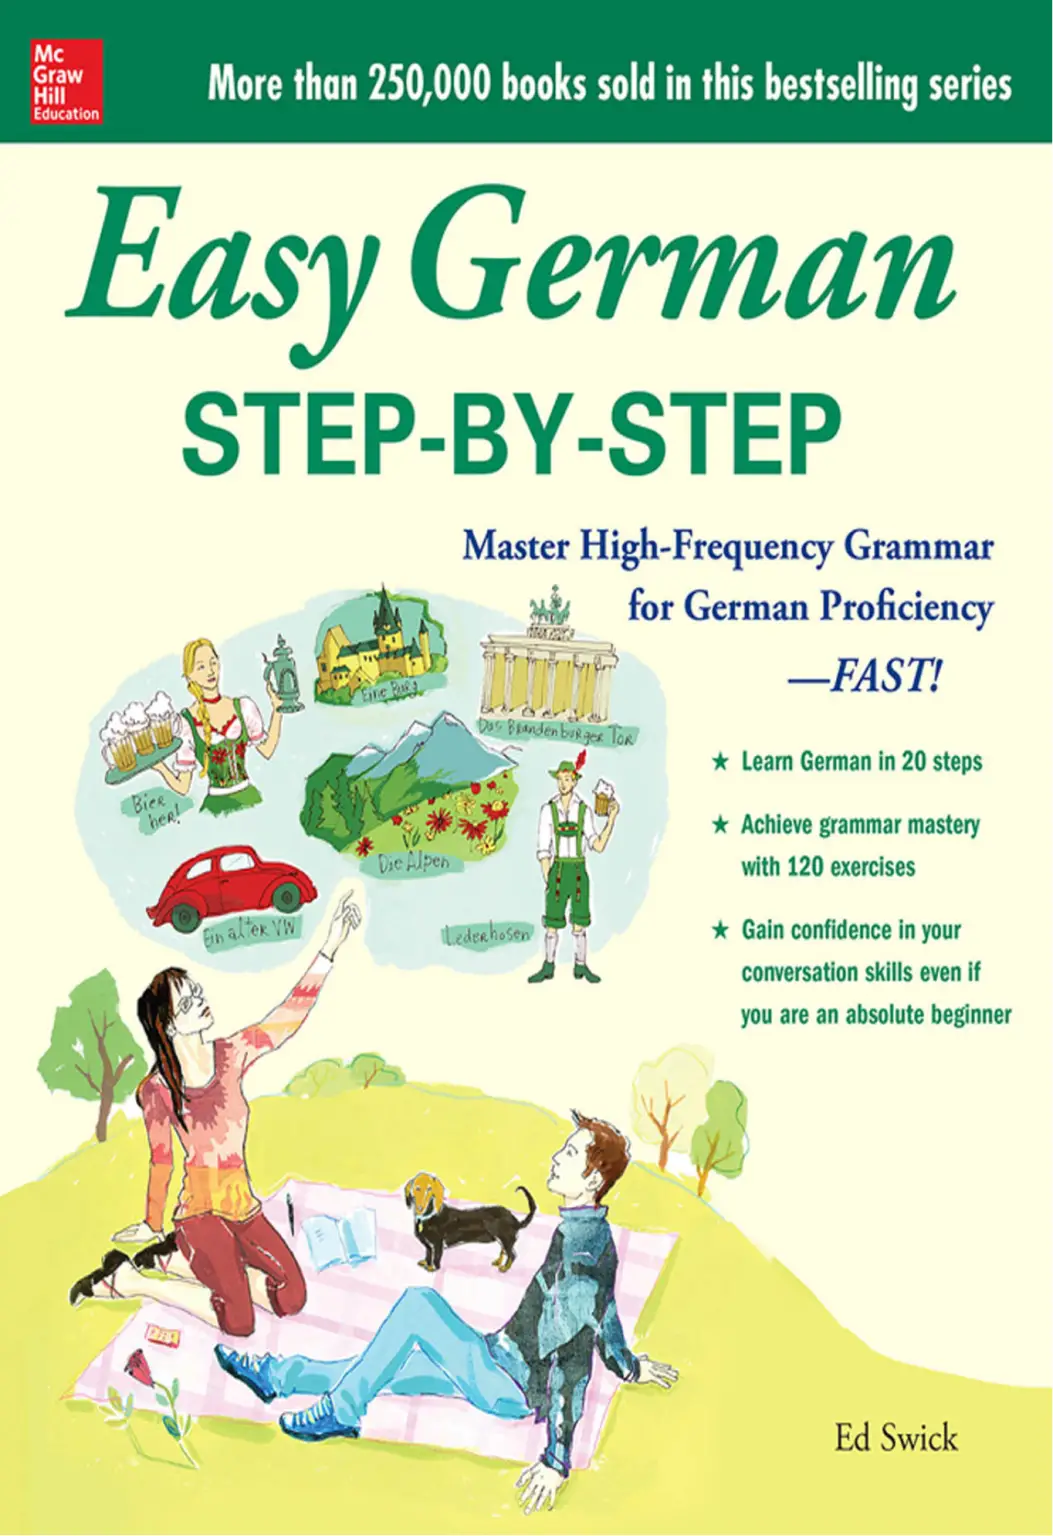 Rich Results on Google's SERP when searching for ''Easy-German-Step-By-Step-Book''